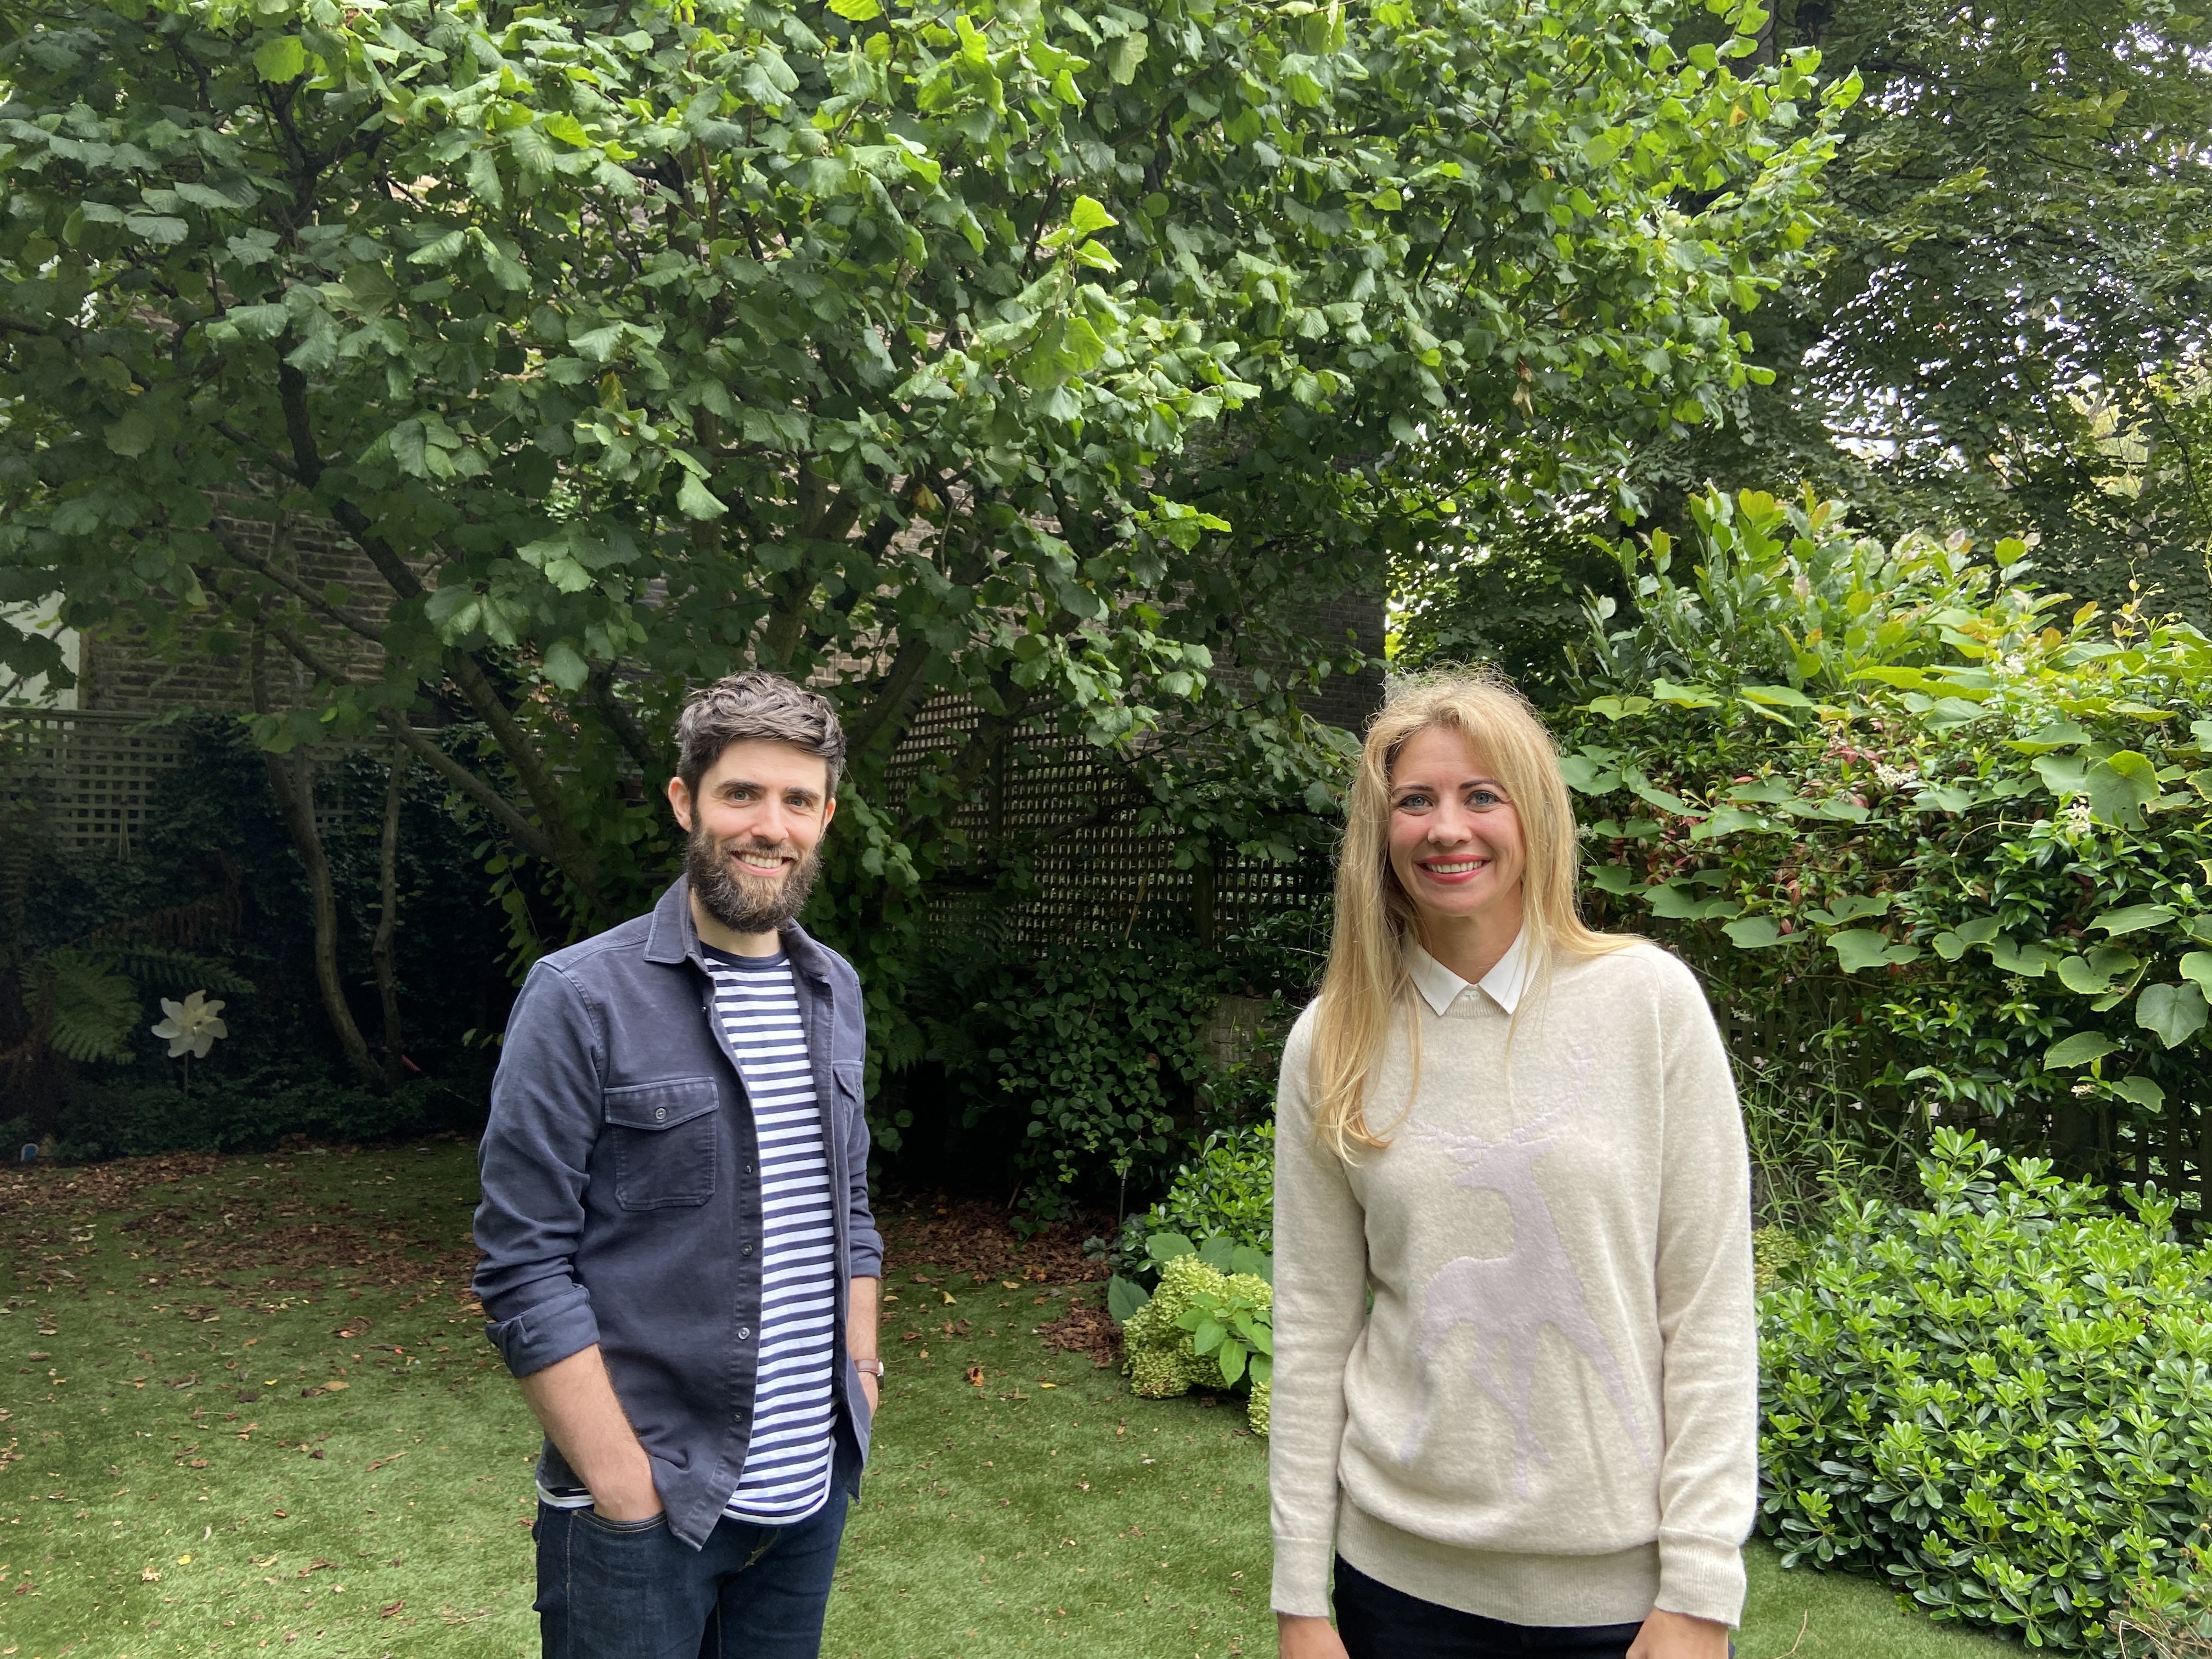 Holly Branson and Virgin StartUp CEO Andy Fishburn smiling in a garden